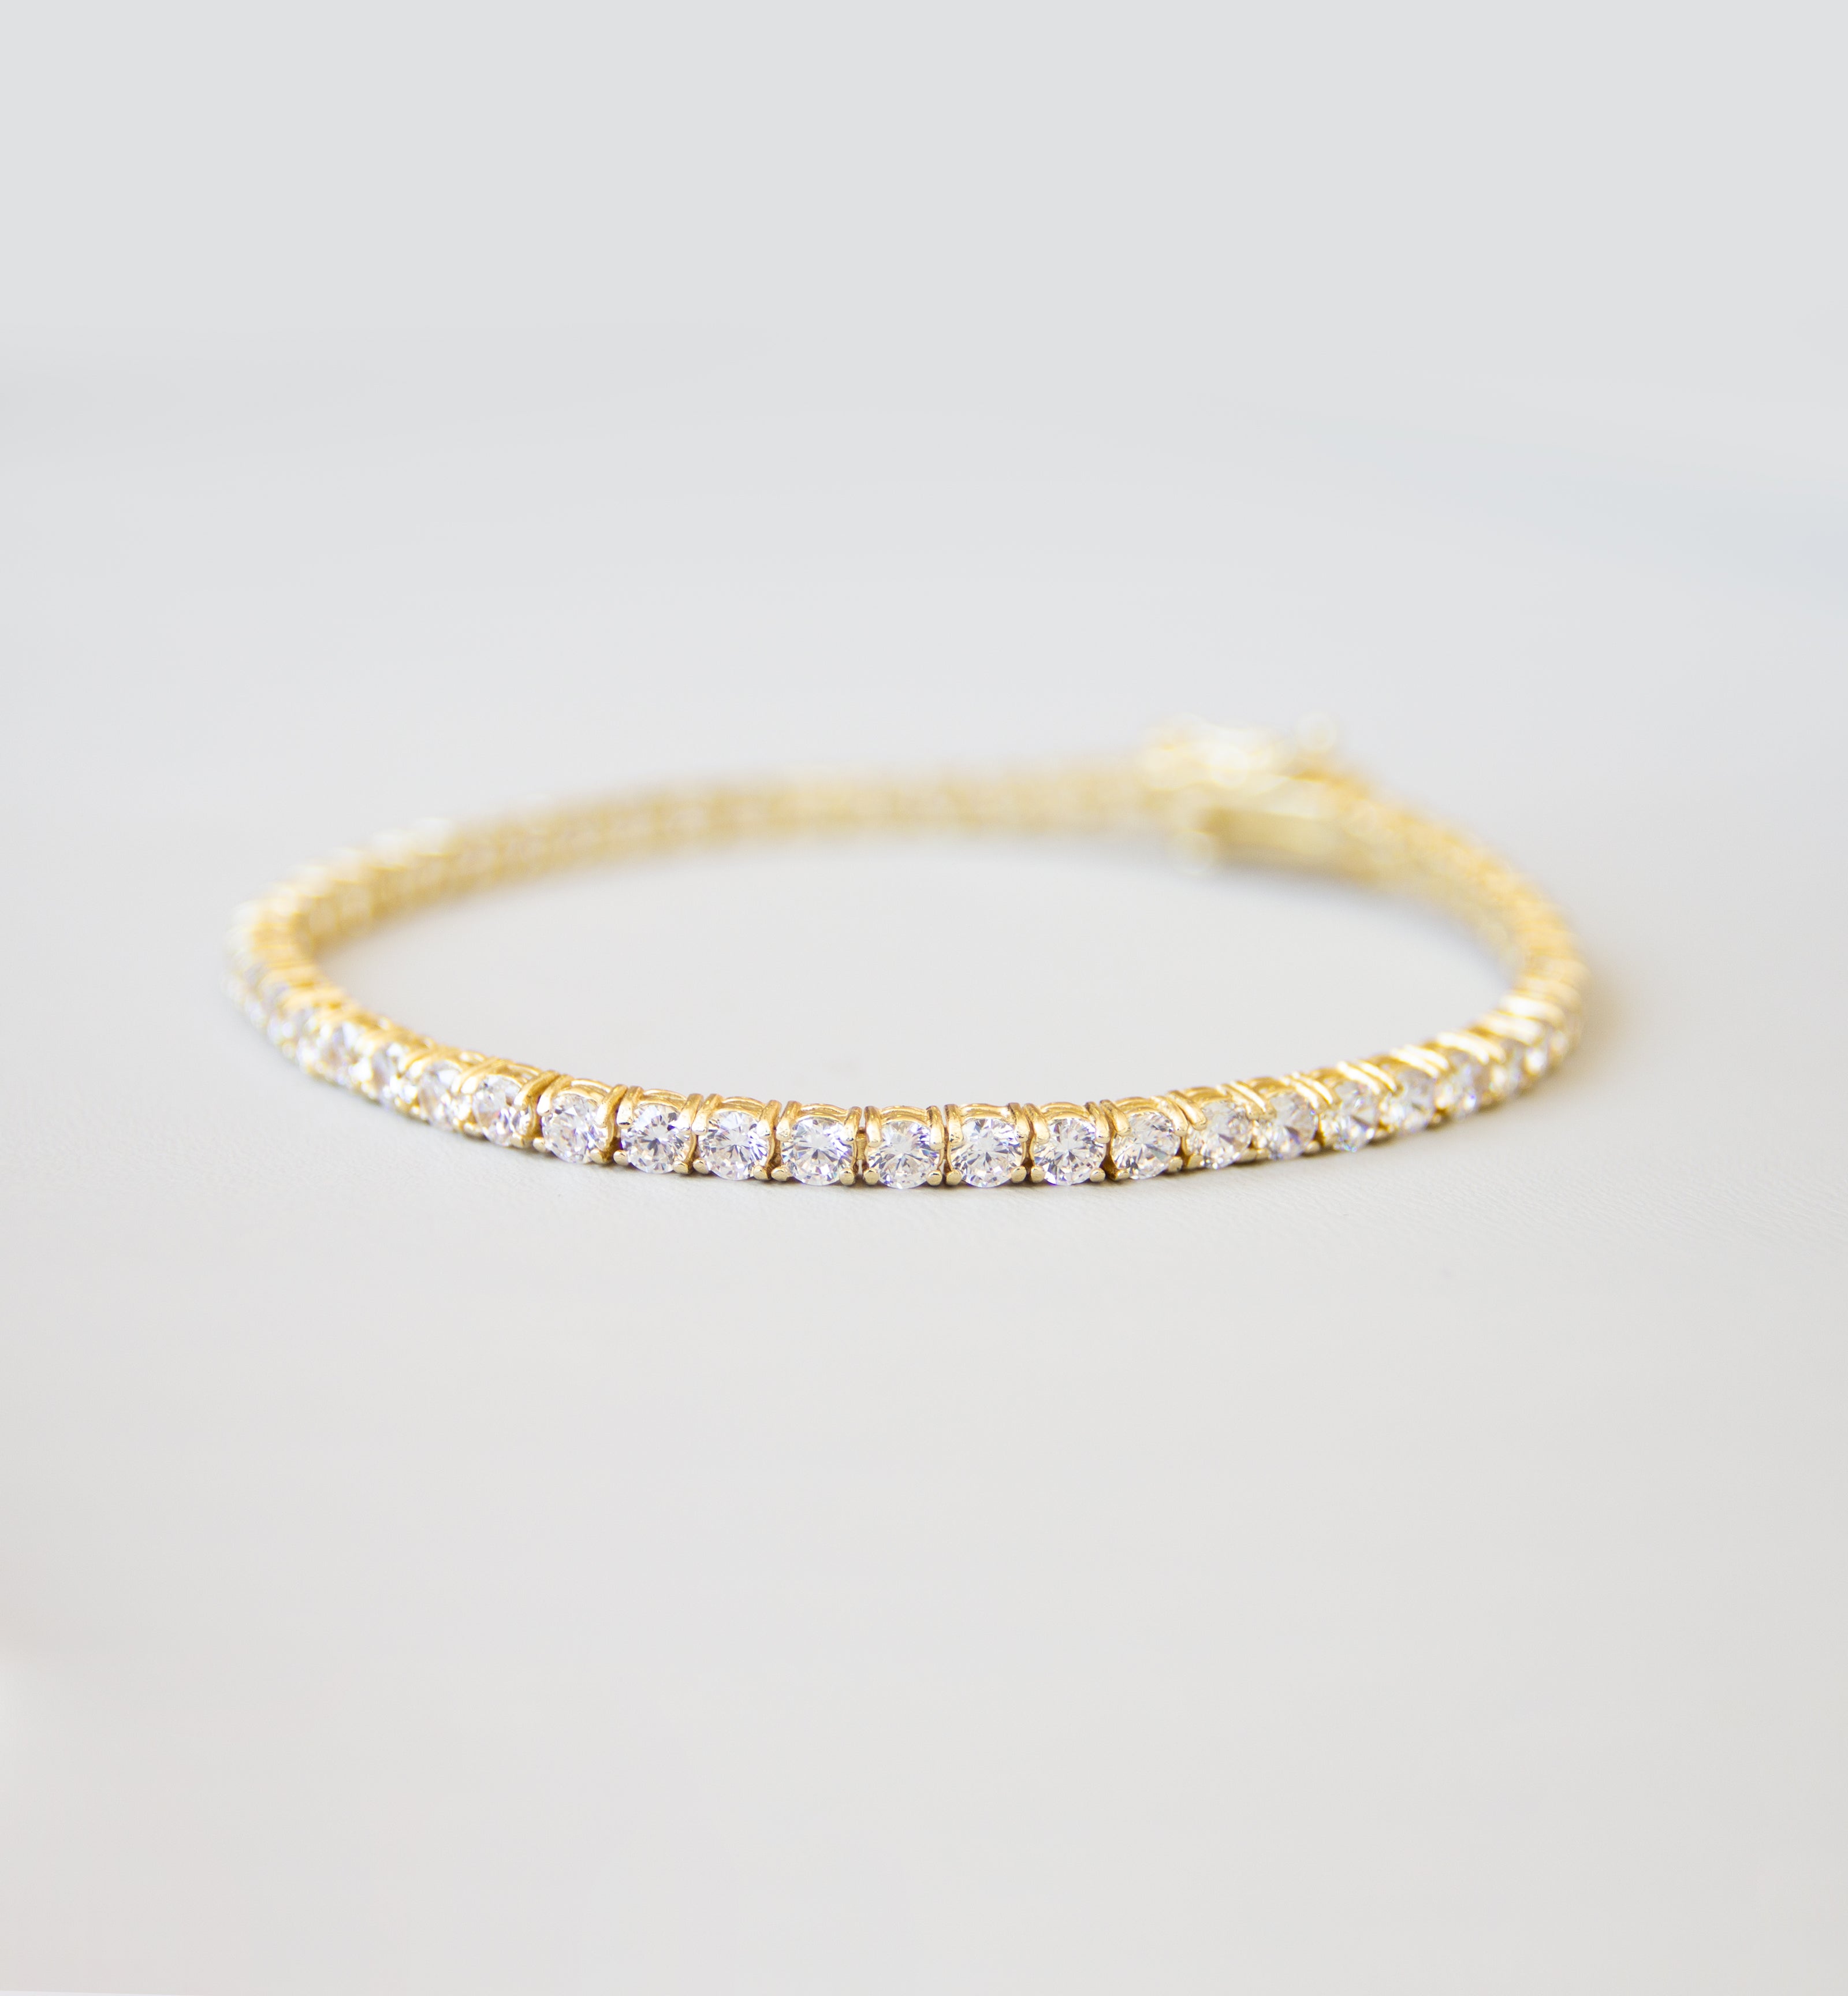 Silver 925 Yellow Gold Plated Tennis Bracelet with Cubic Zircon Stones